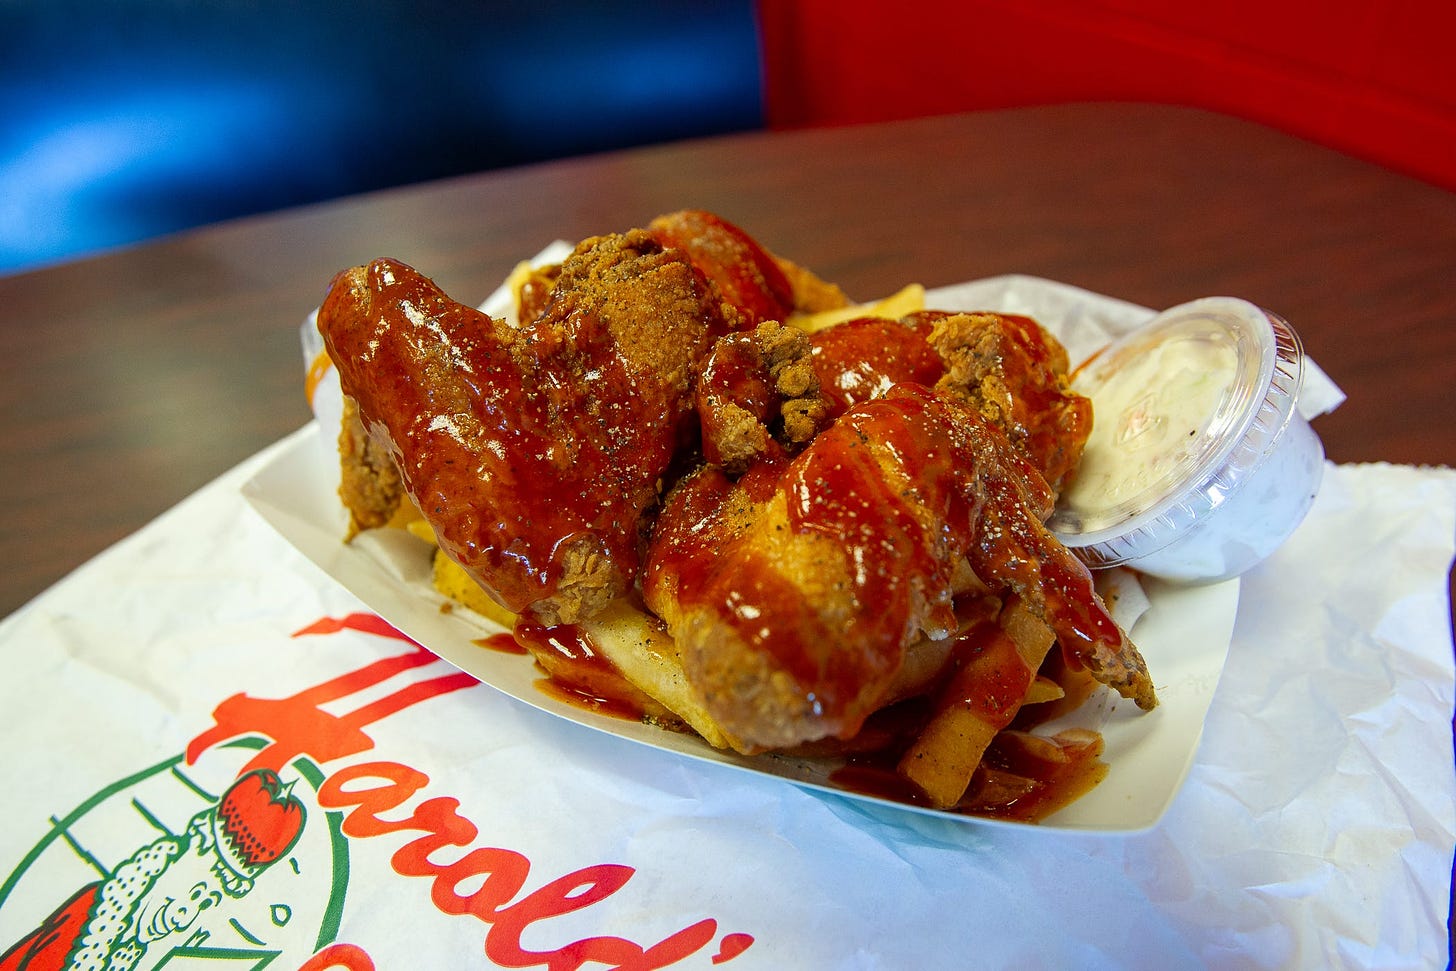 Harold's Chicken opens in south Phoenix. Here's what to expect